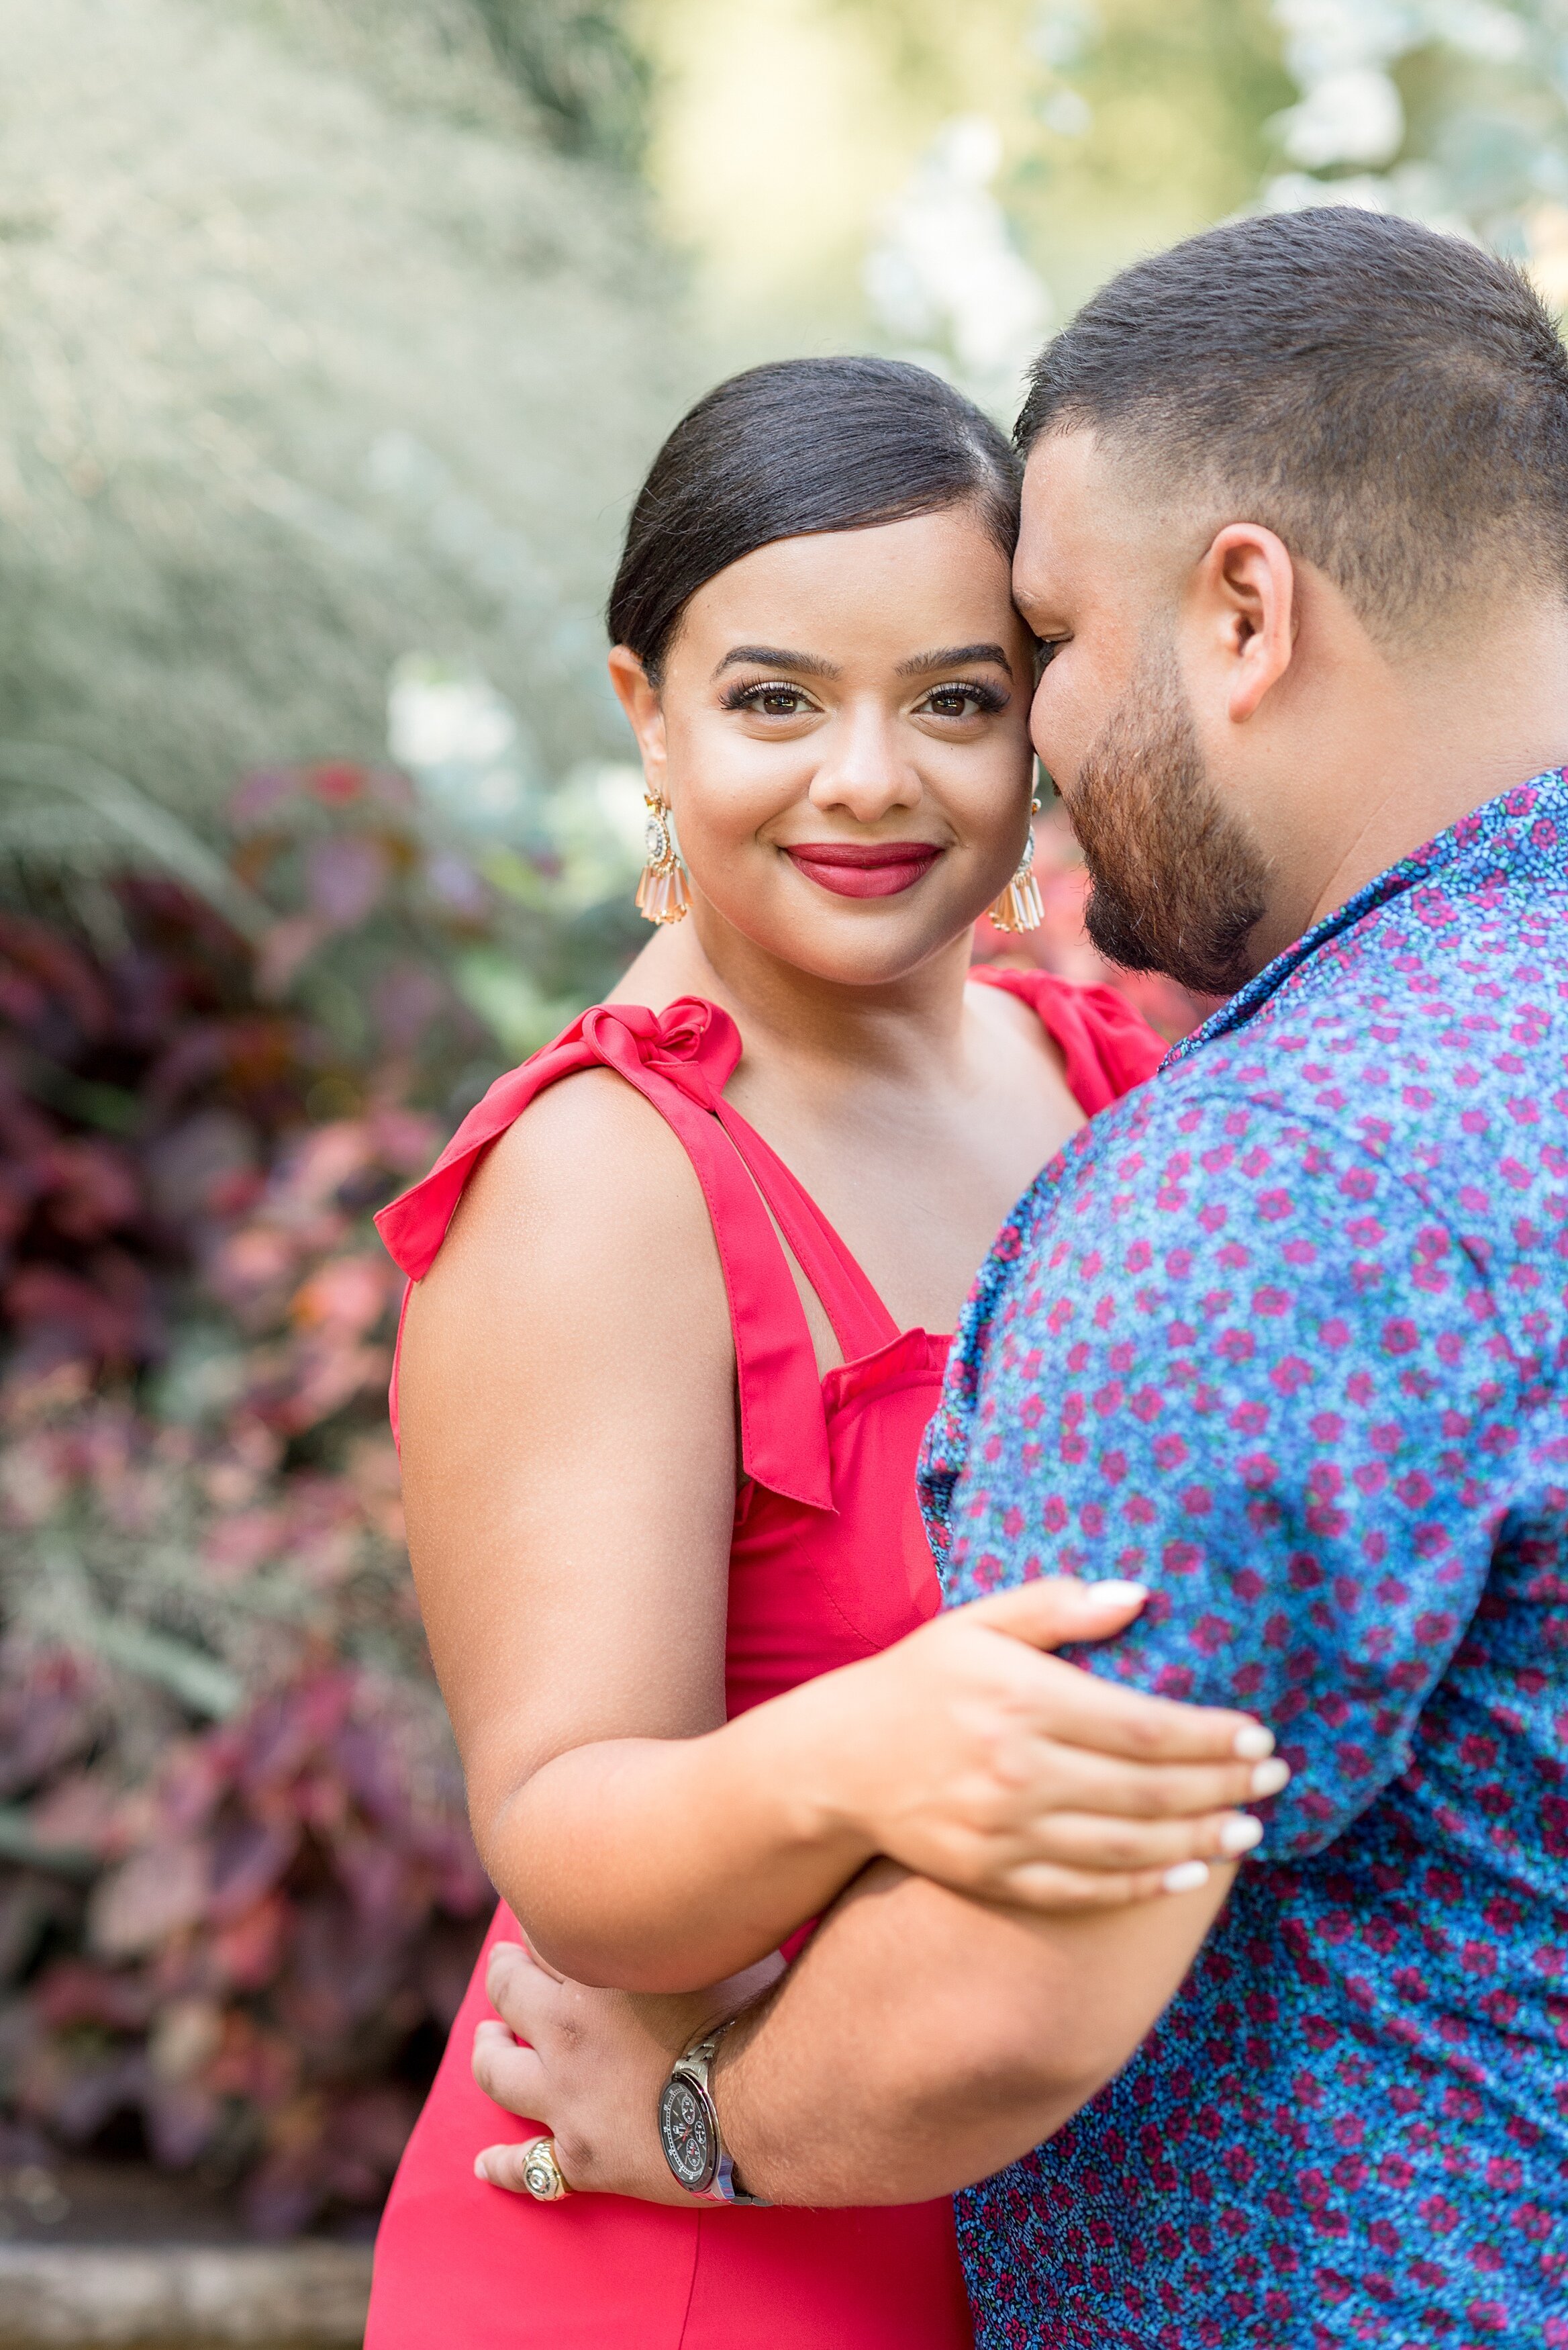 Longwood Gardens Kennet Square Pa Summer Engagement Session Photography_7687.jpg